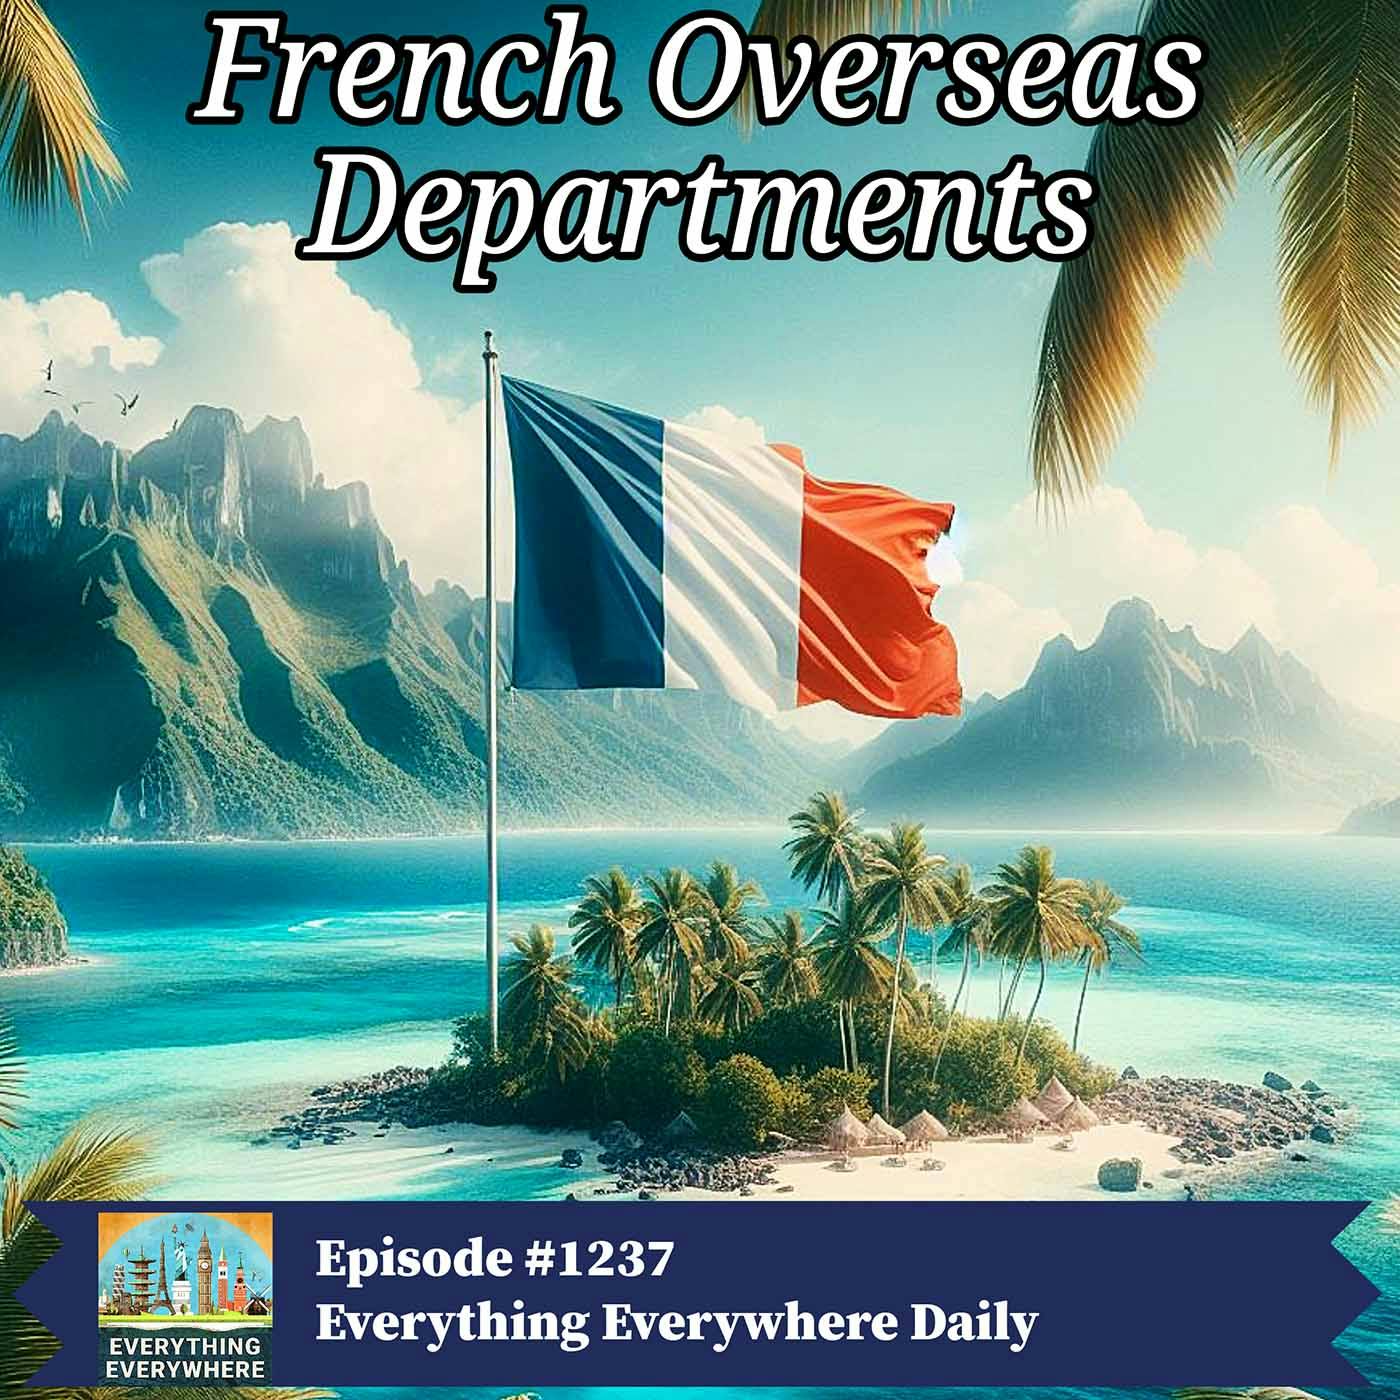 French Overseas Departments